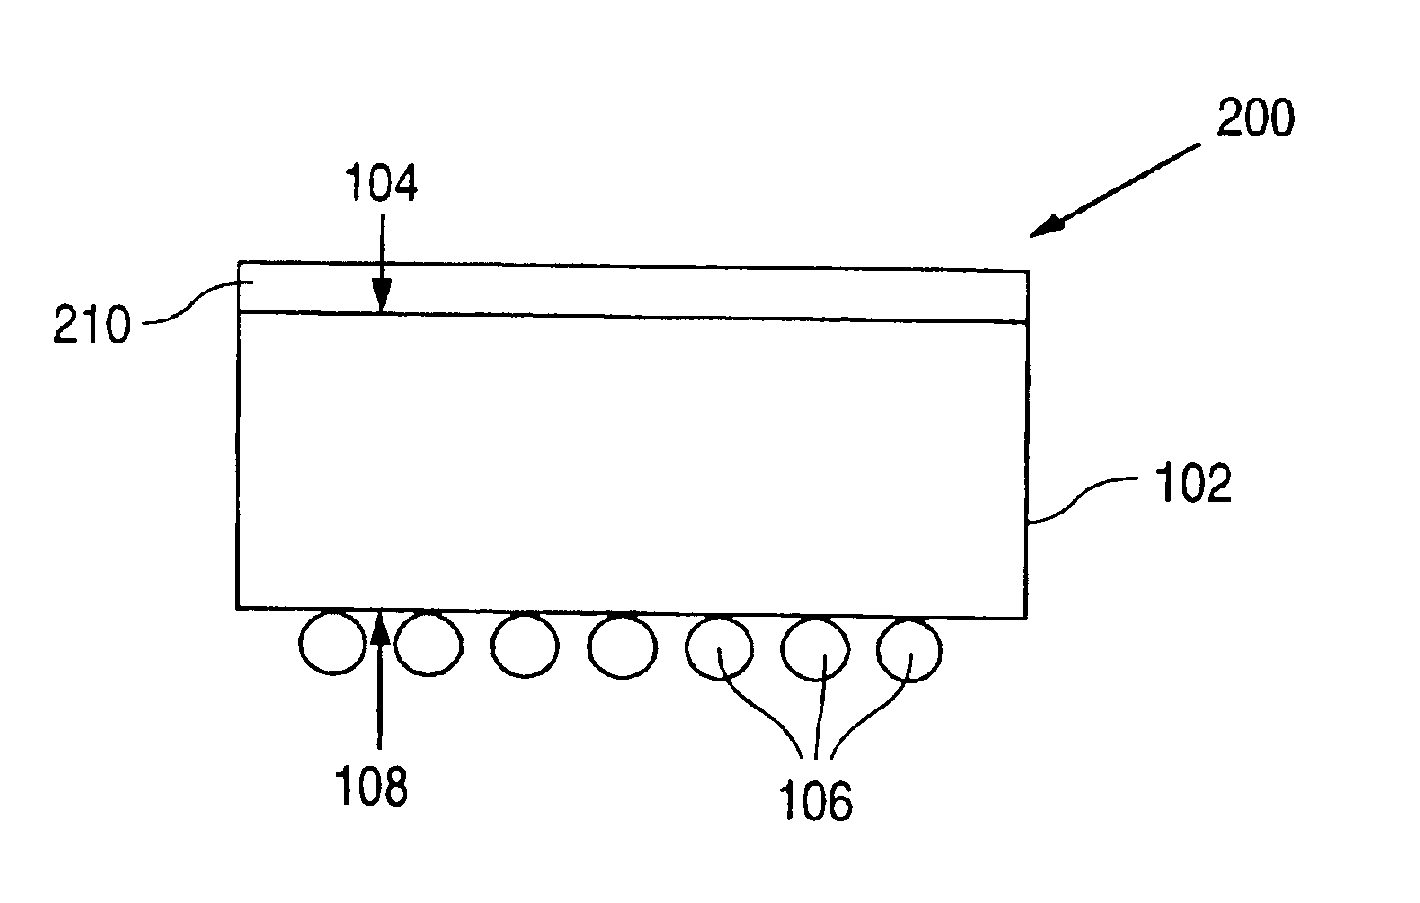 Semiconductor wafer having a bottom surface protective coating